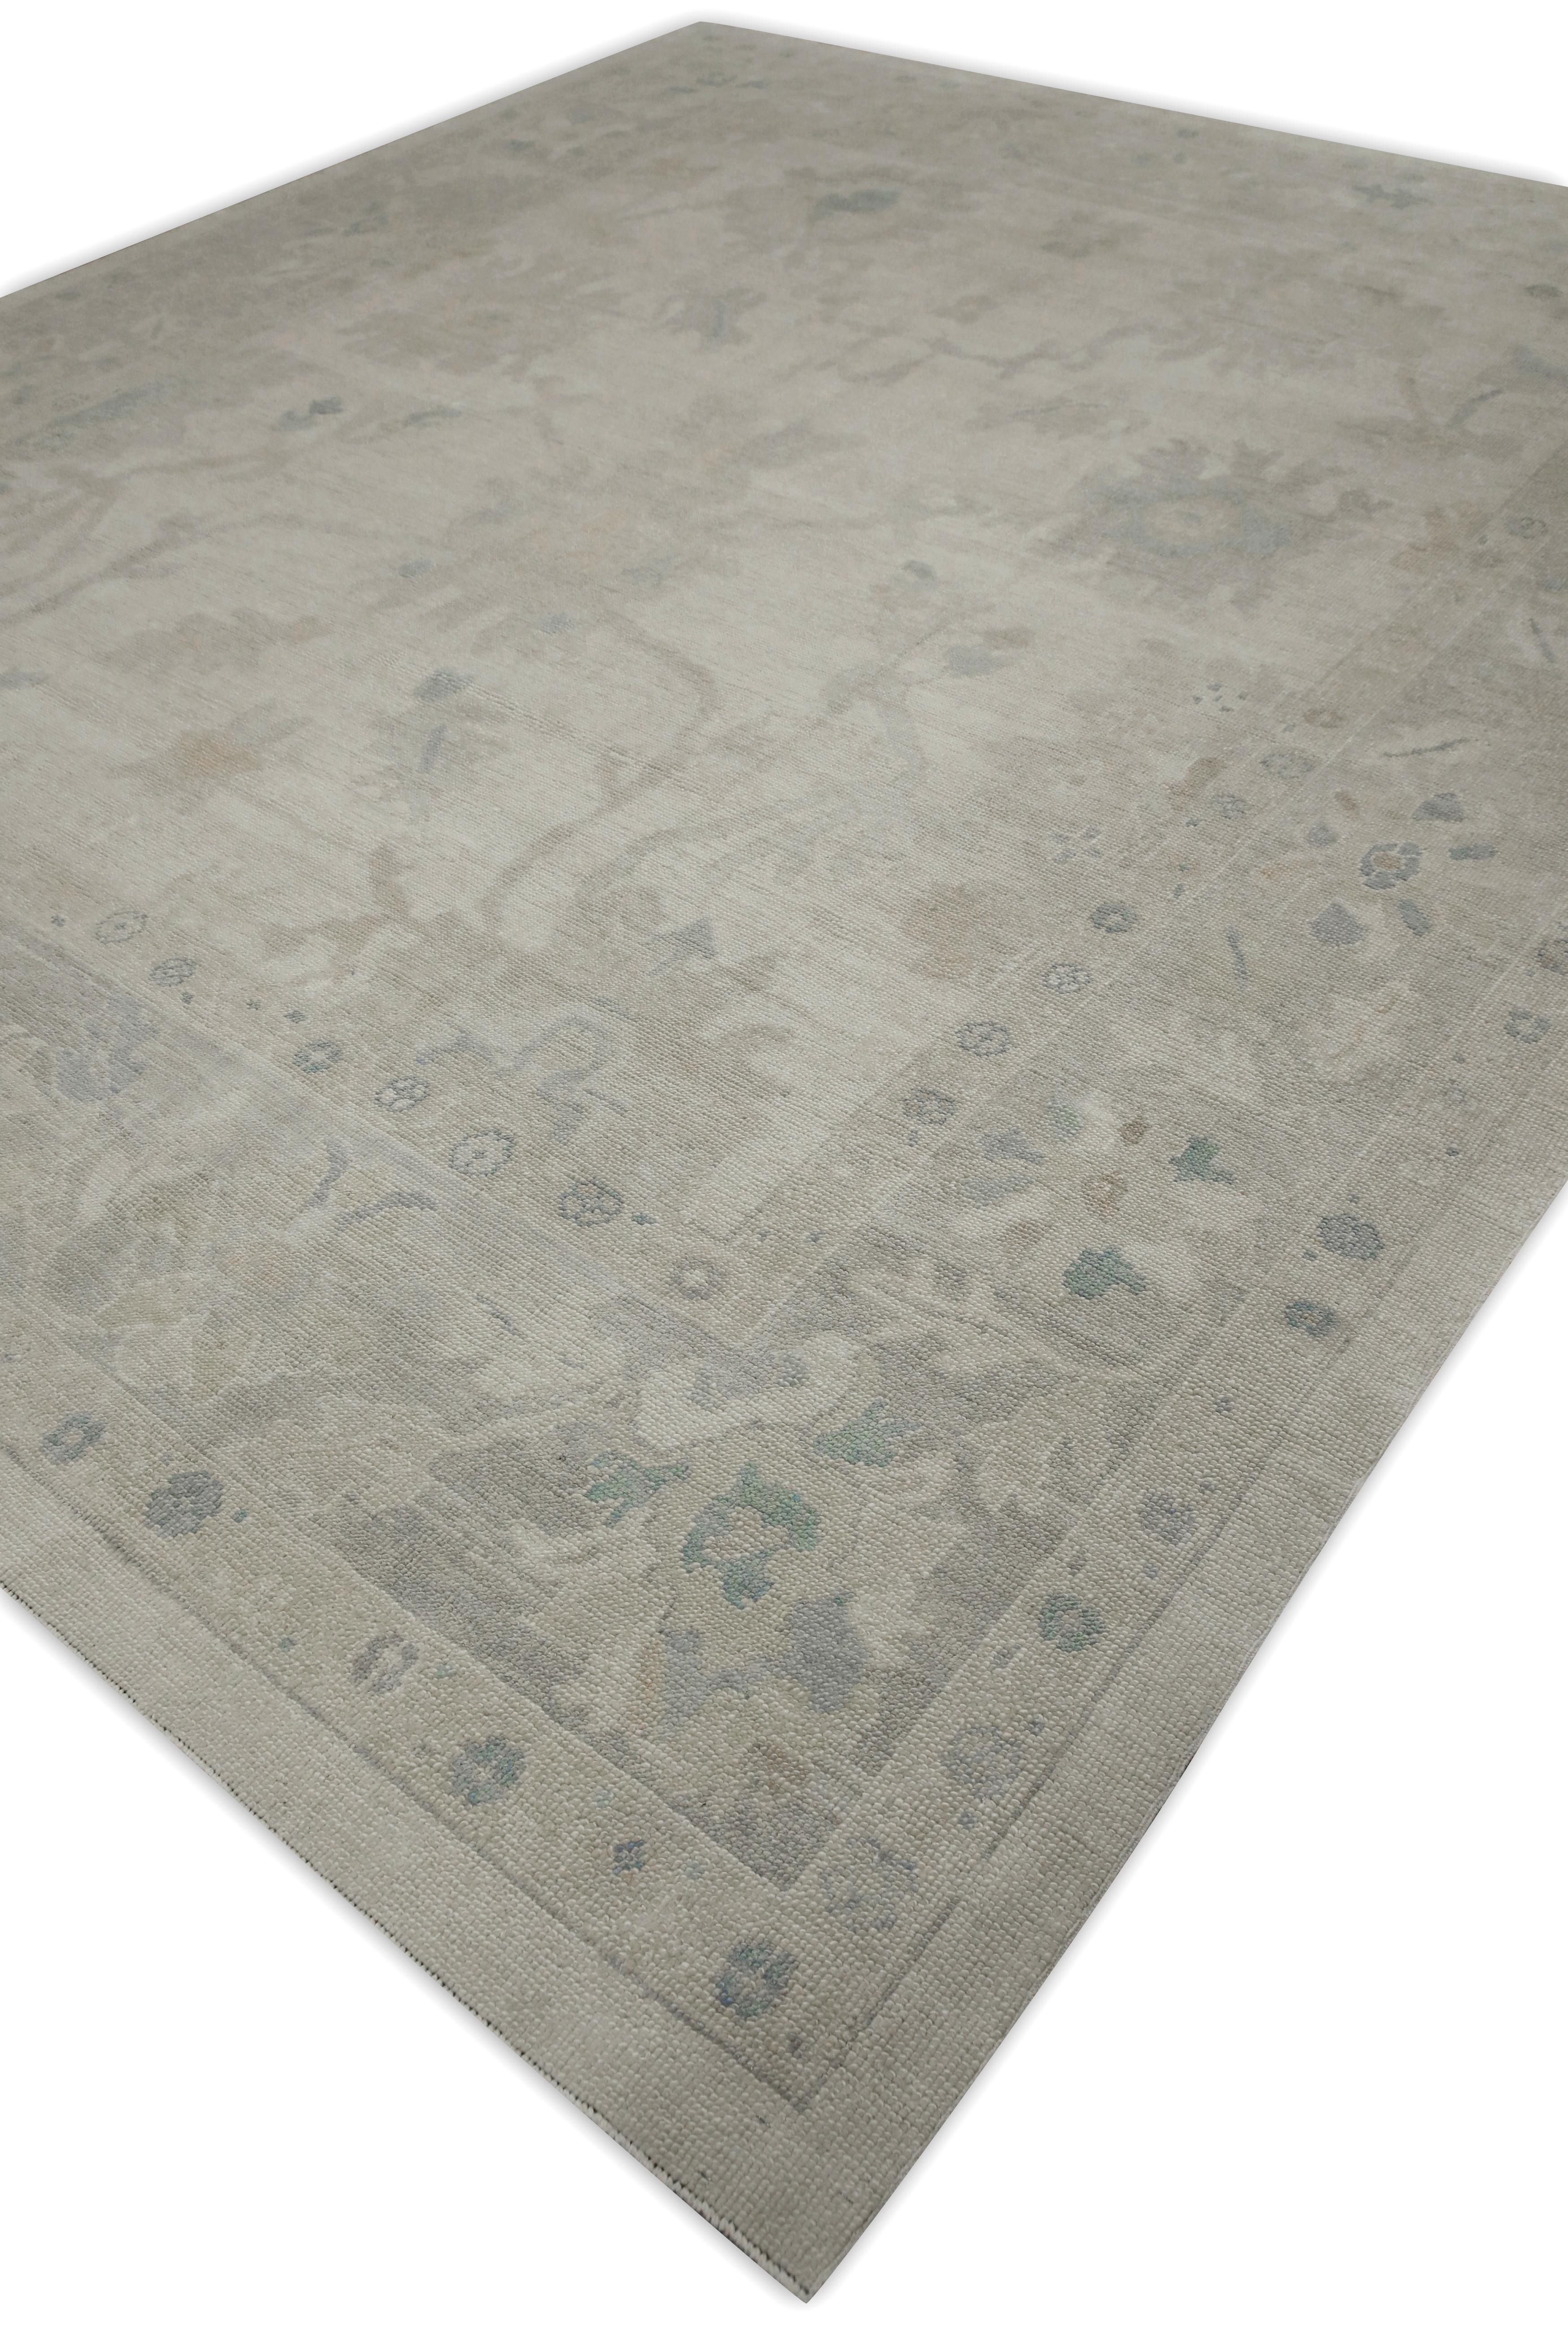 Contemporary Taupe Floral Design Handwoven Wool Turkish Oushak Rug 10'8